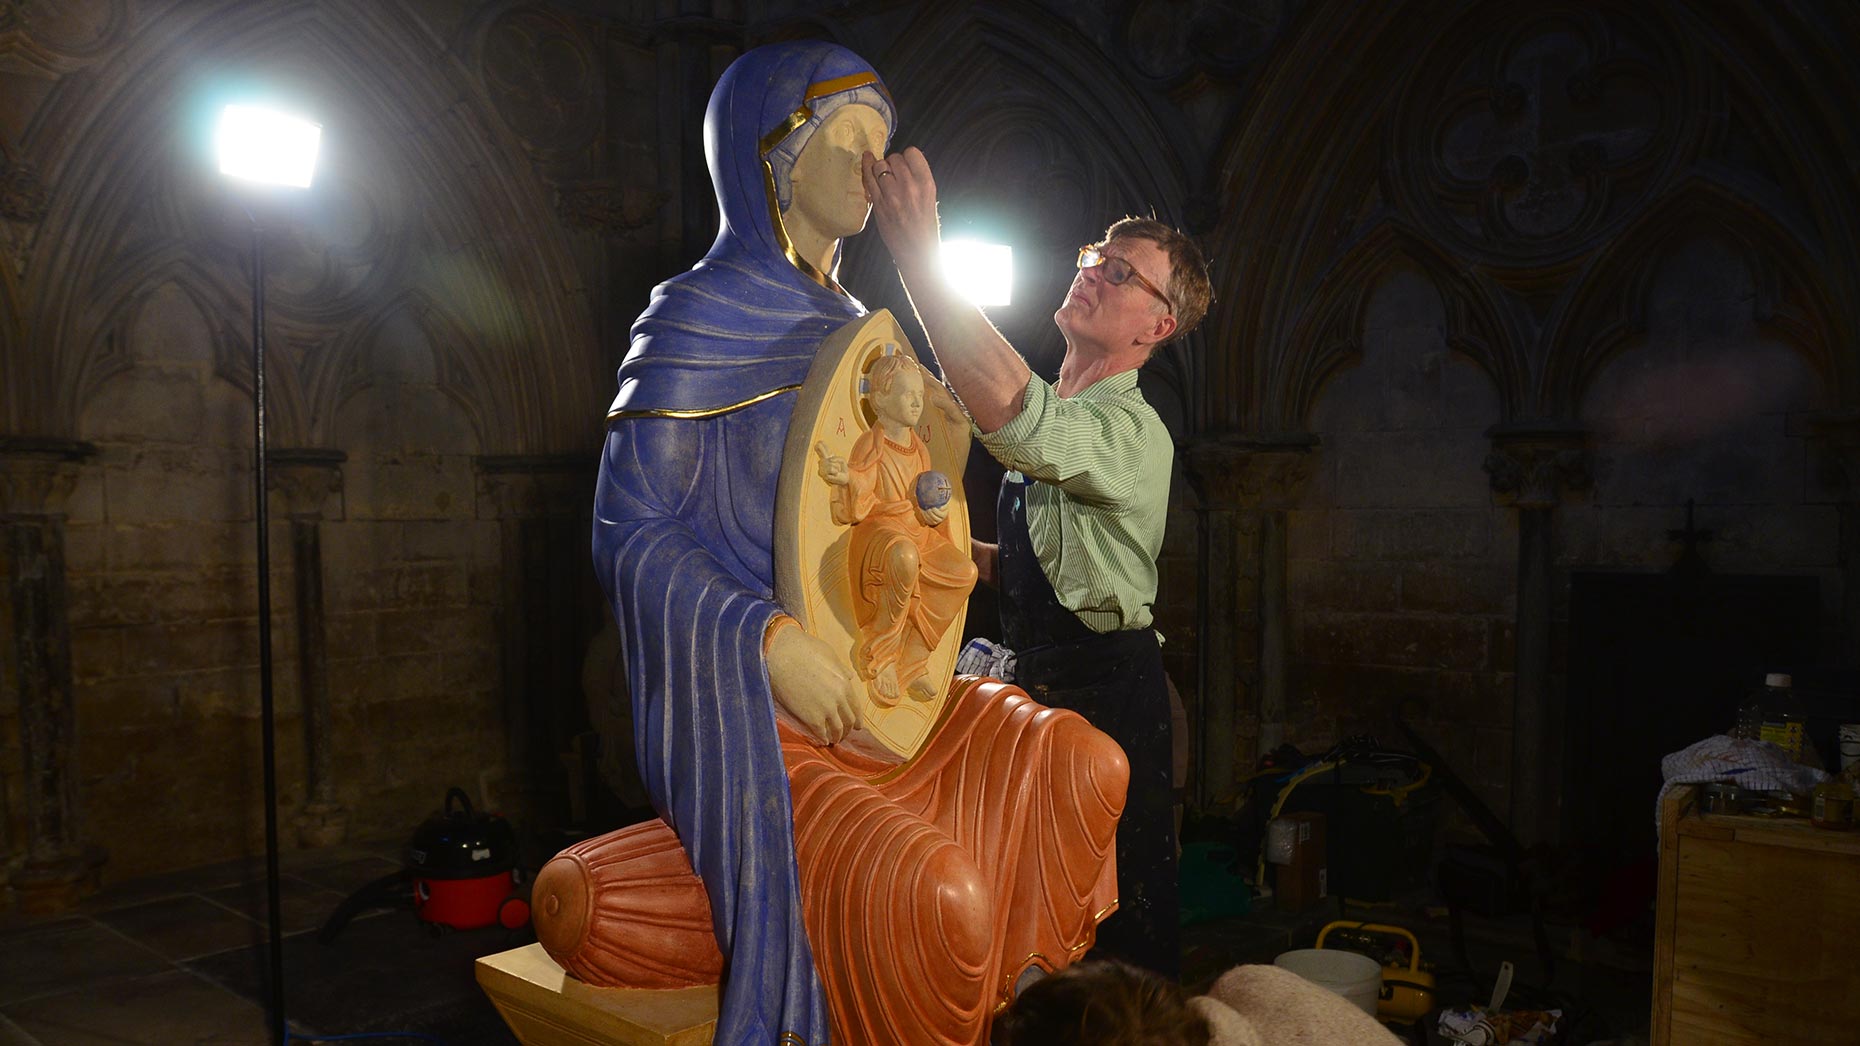 The sculpture was made by liturgical artist Aidan Hart, and took over three years to complete. Photo: Steve Smailes for The Lincolnite